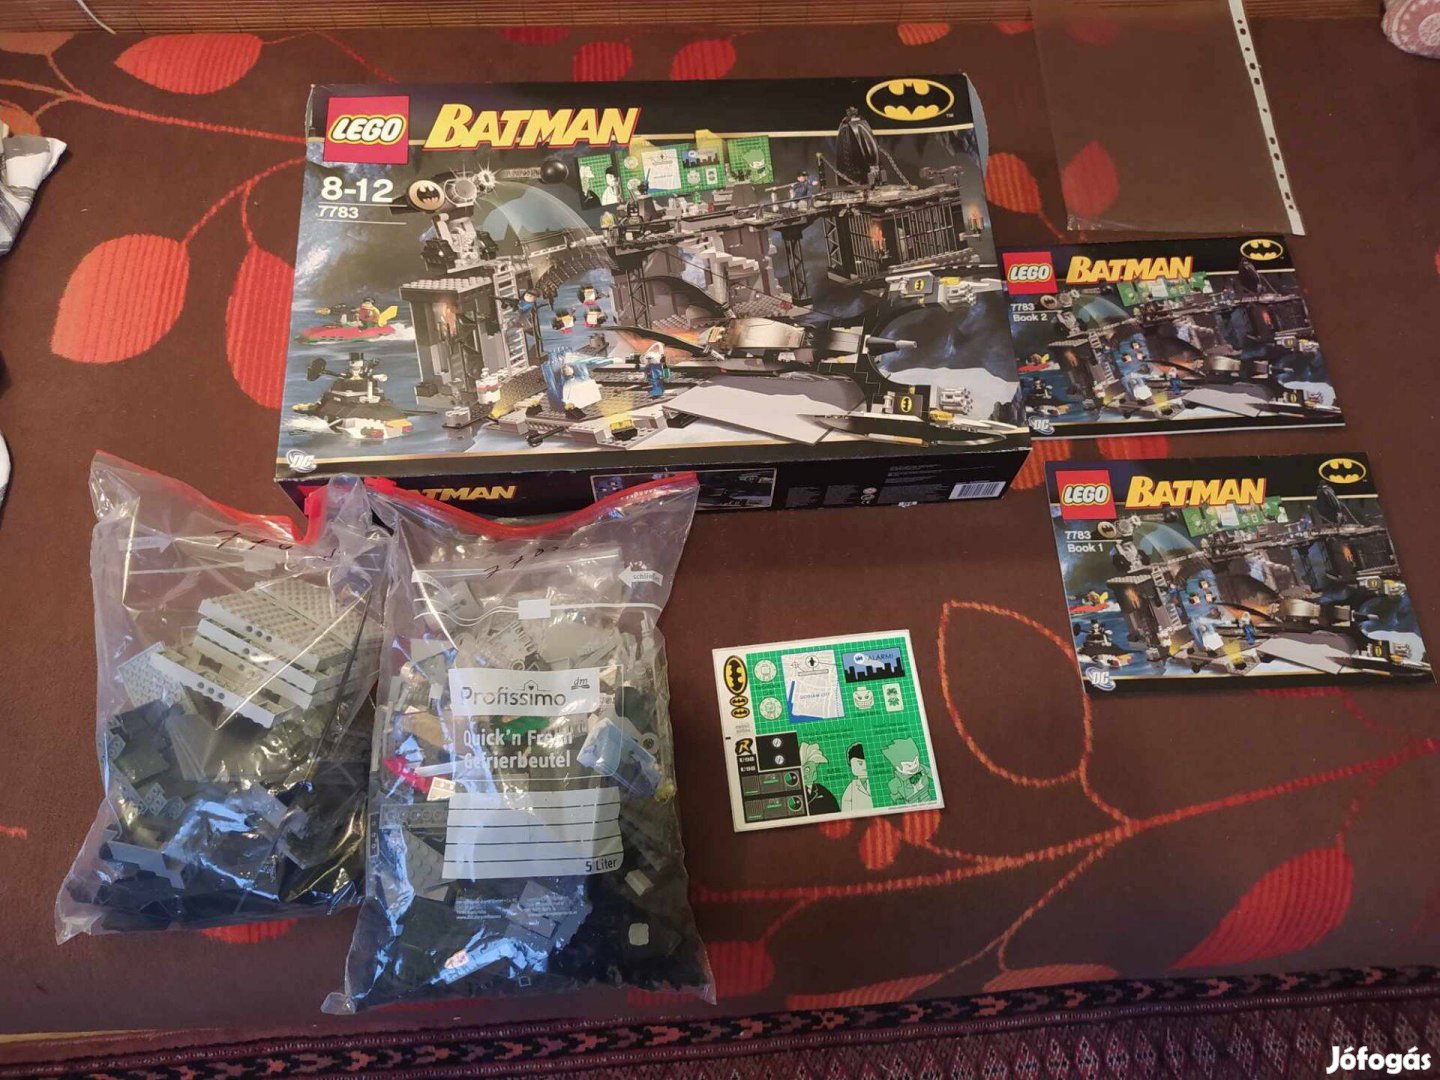 LEGO DC Super Heroes 7783 The Batcave: The Penguin and Mr. Freeze's In